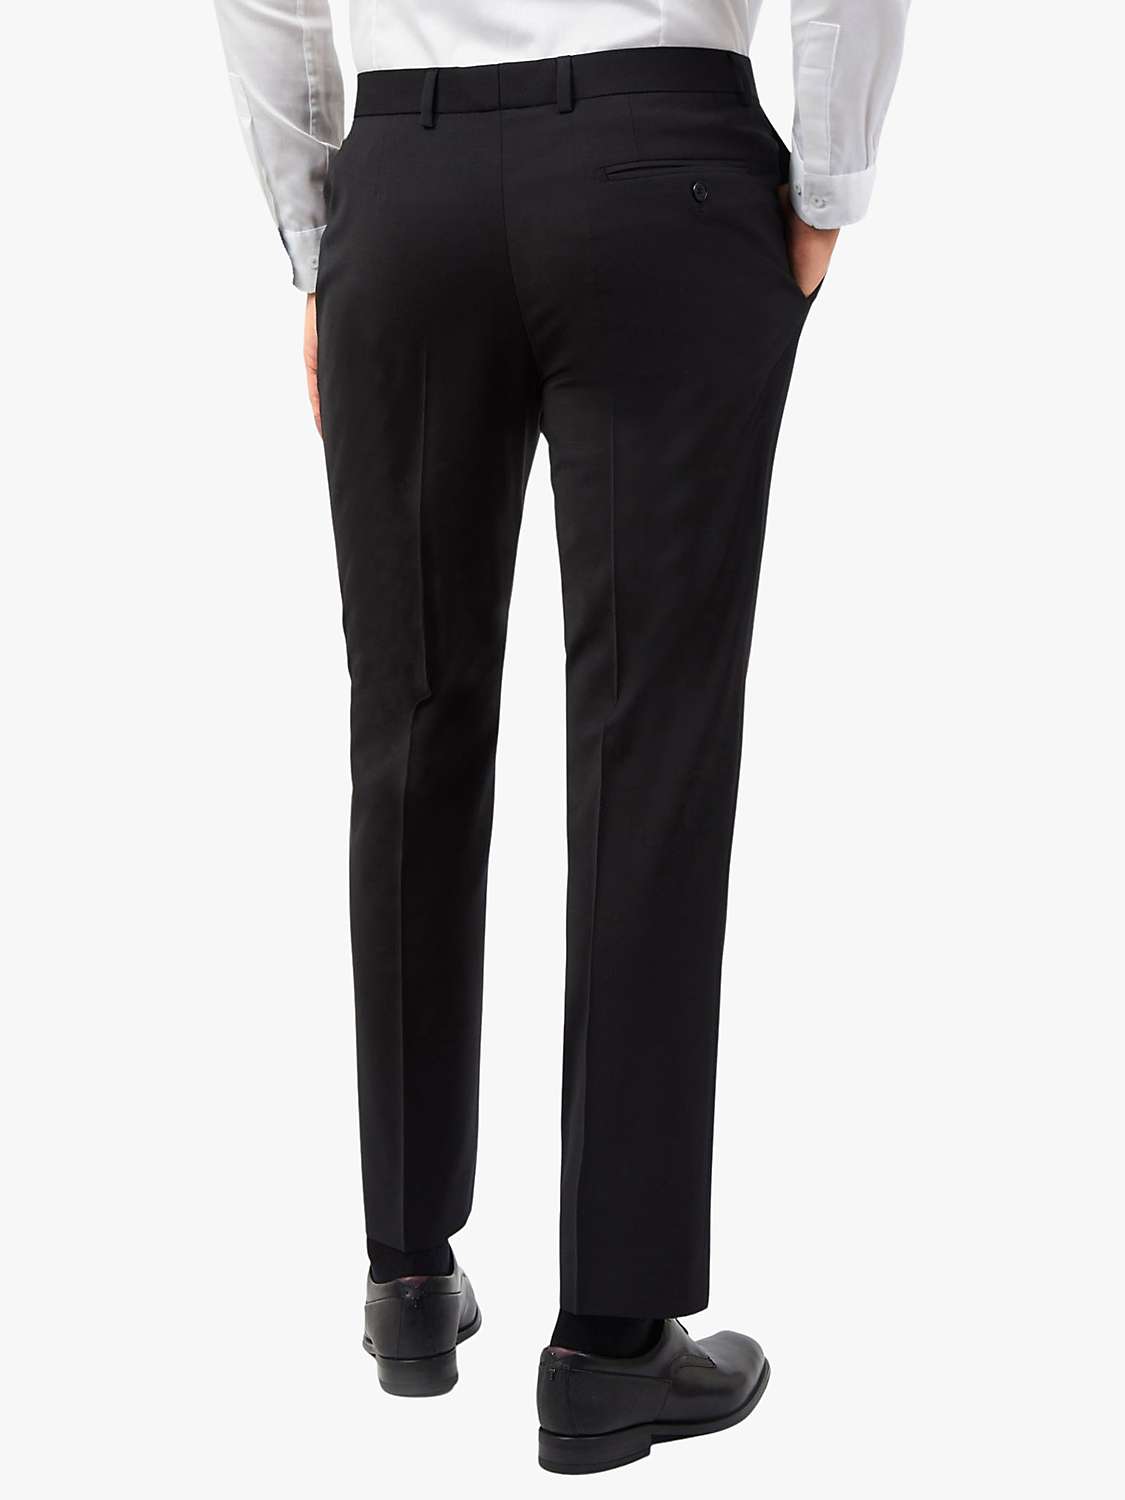 Buy Ted Baker Tailored Fit Wool Blend Suit Trousers, Black Online at johnlewis.com